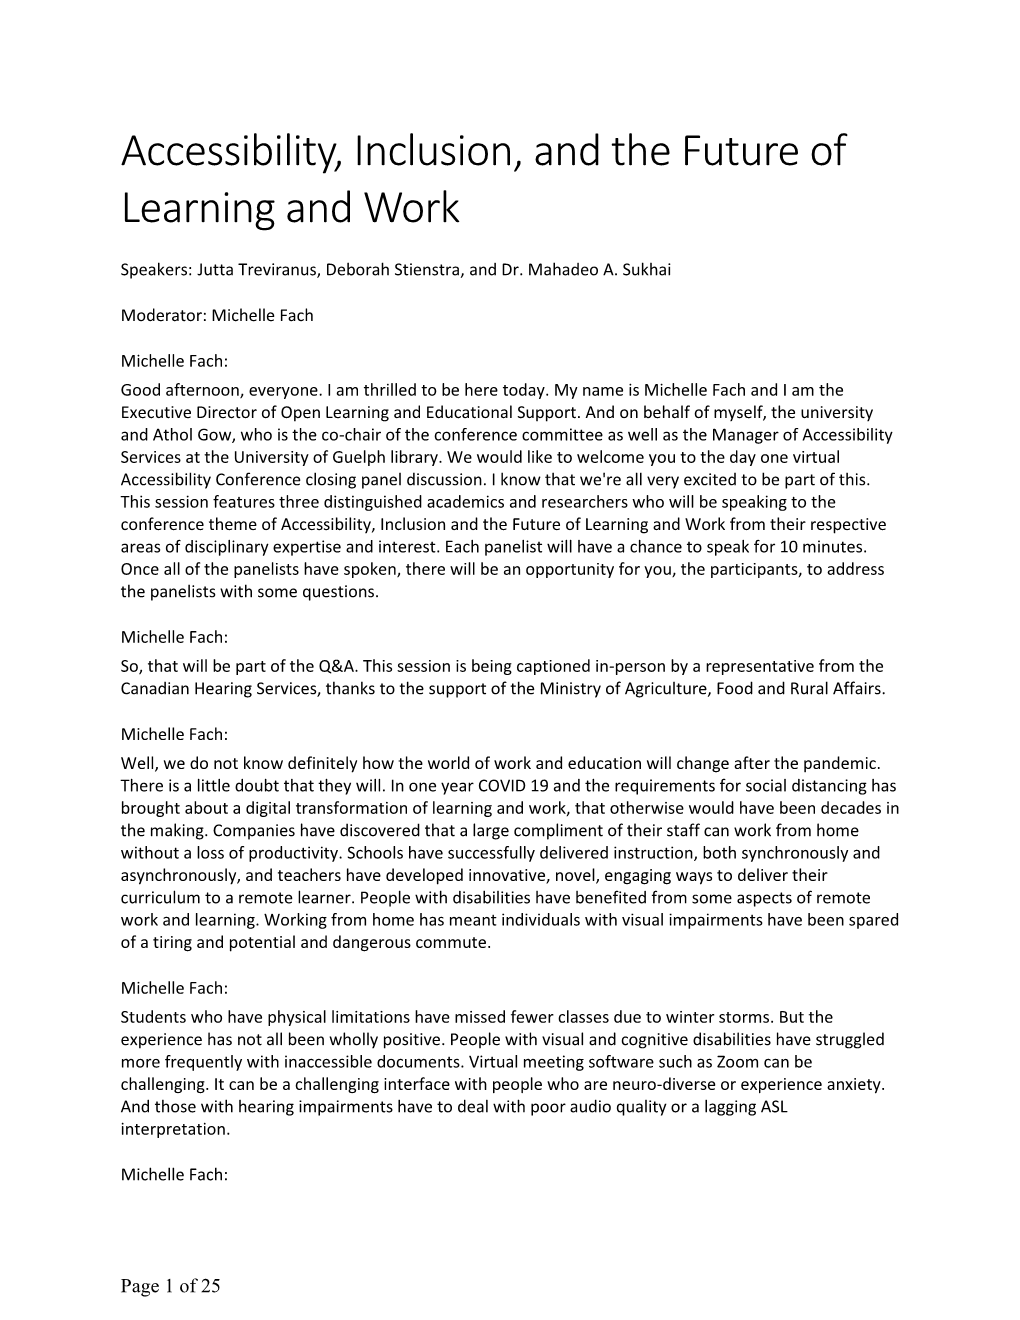 Accessibility, Inclusion, and the Future of Learning and Work